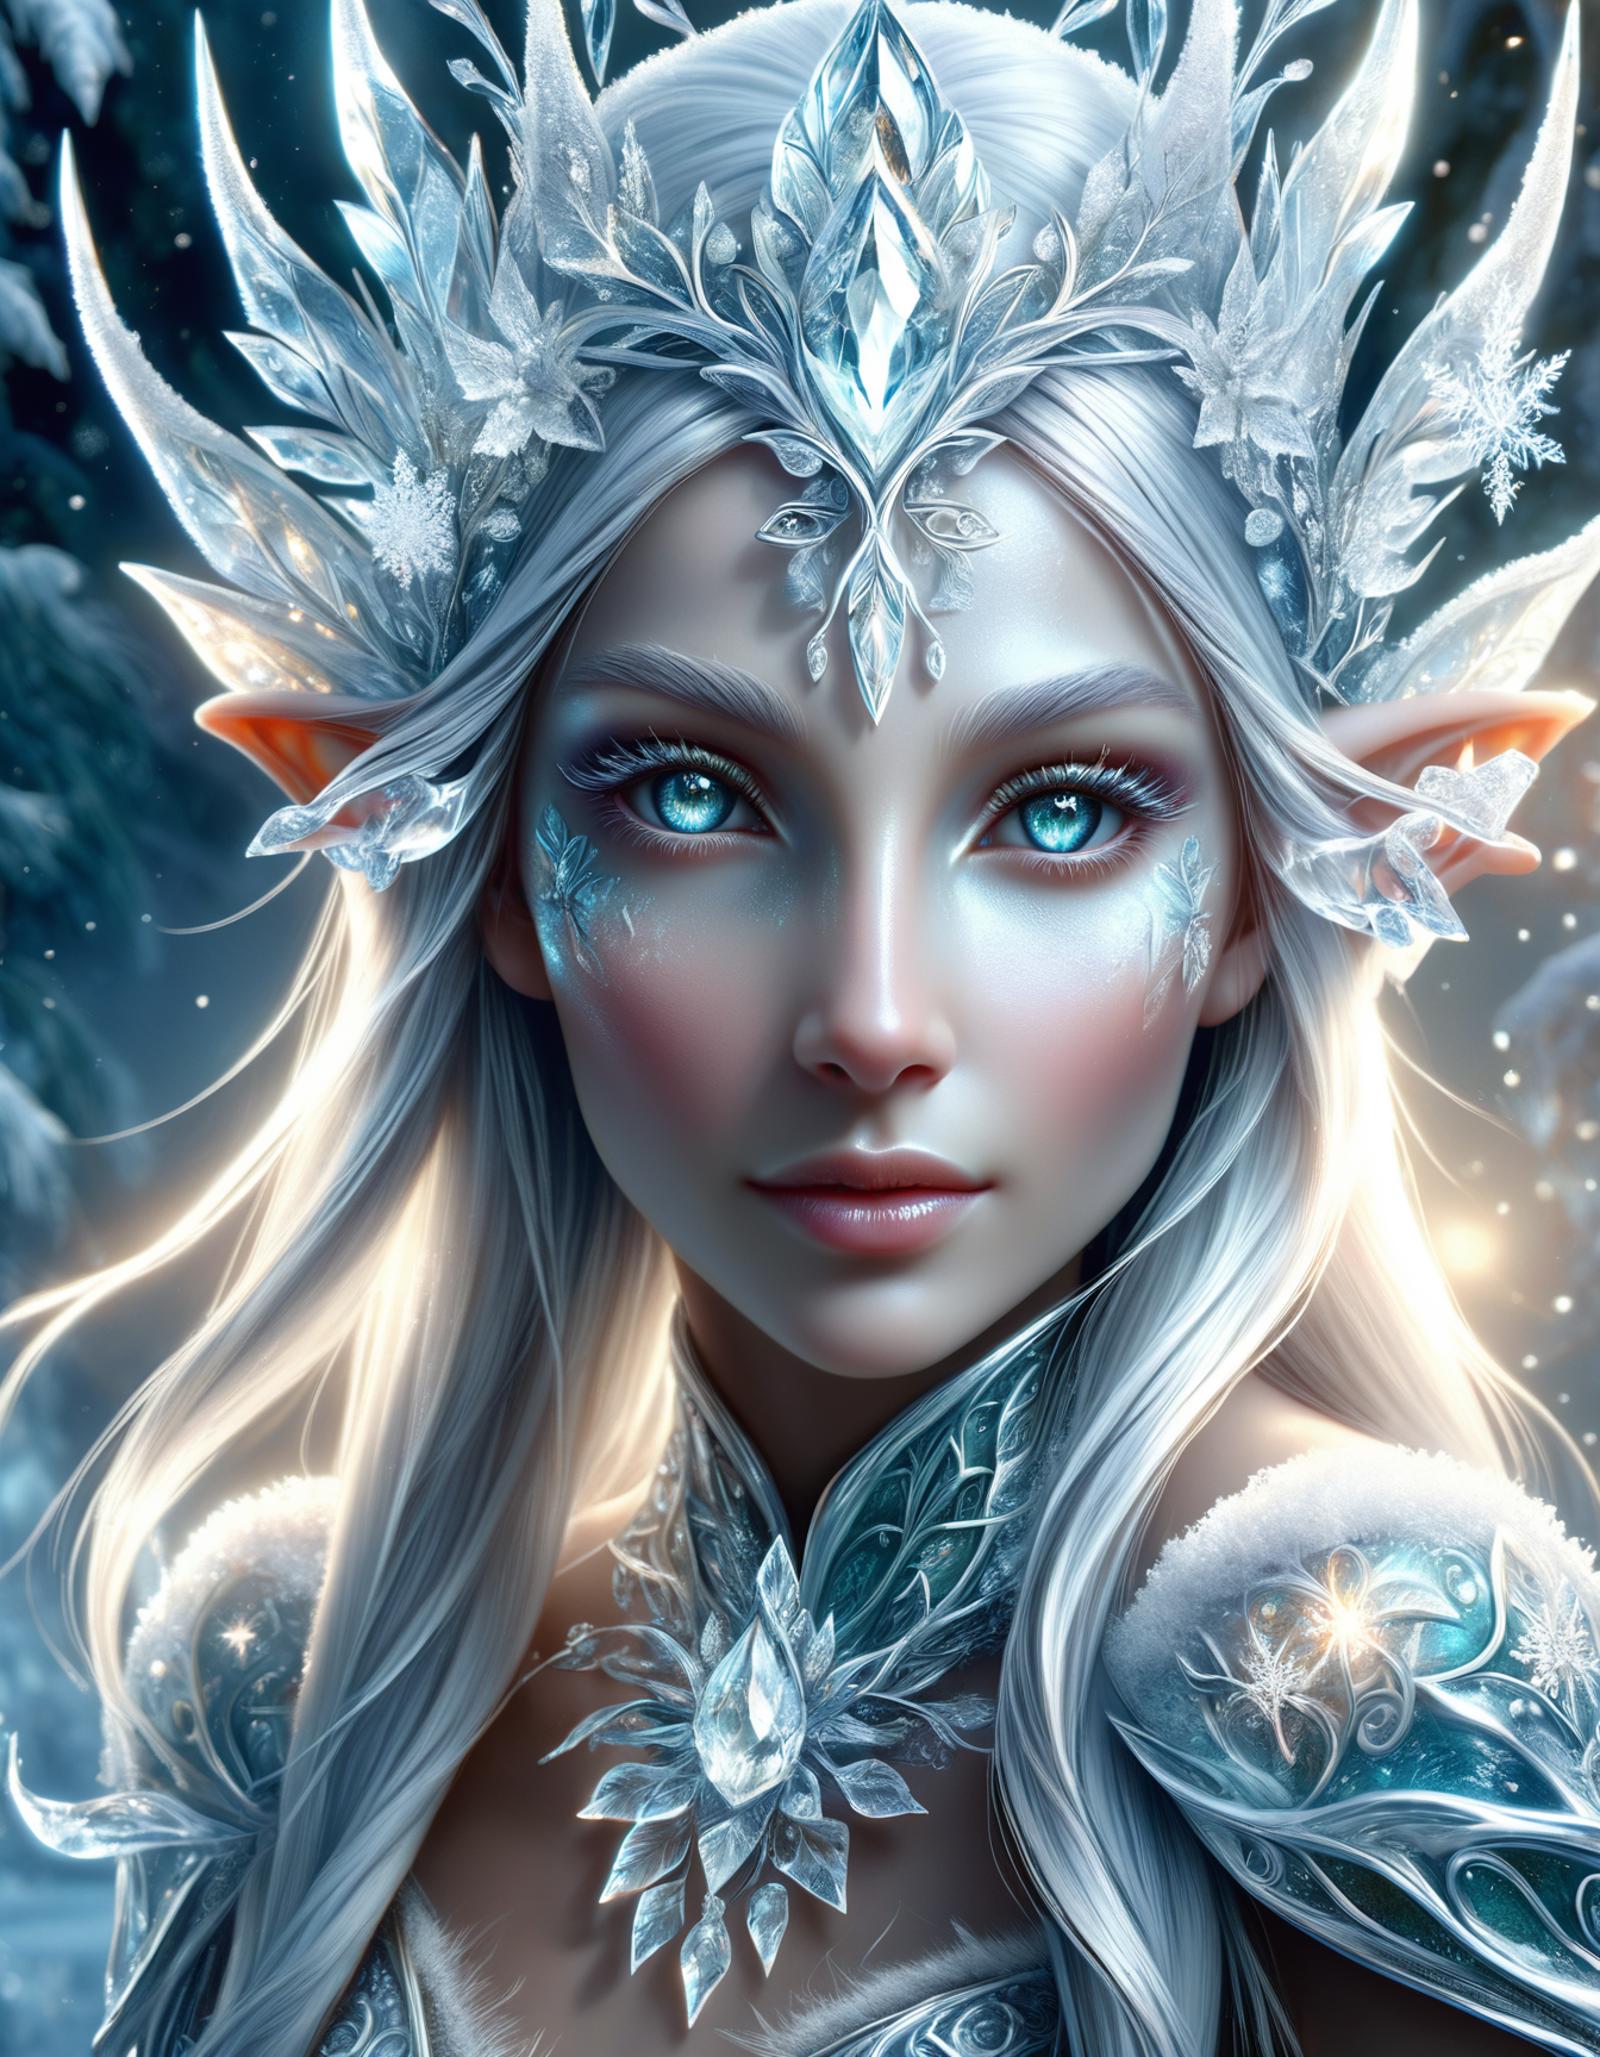 A beautiful elf woman with blue eyes and a white crown, snowflakes and icy elements on her outfit.